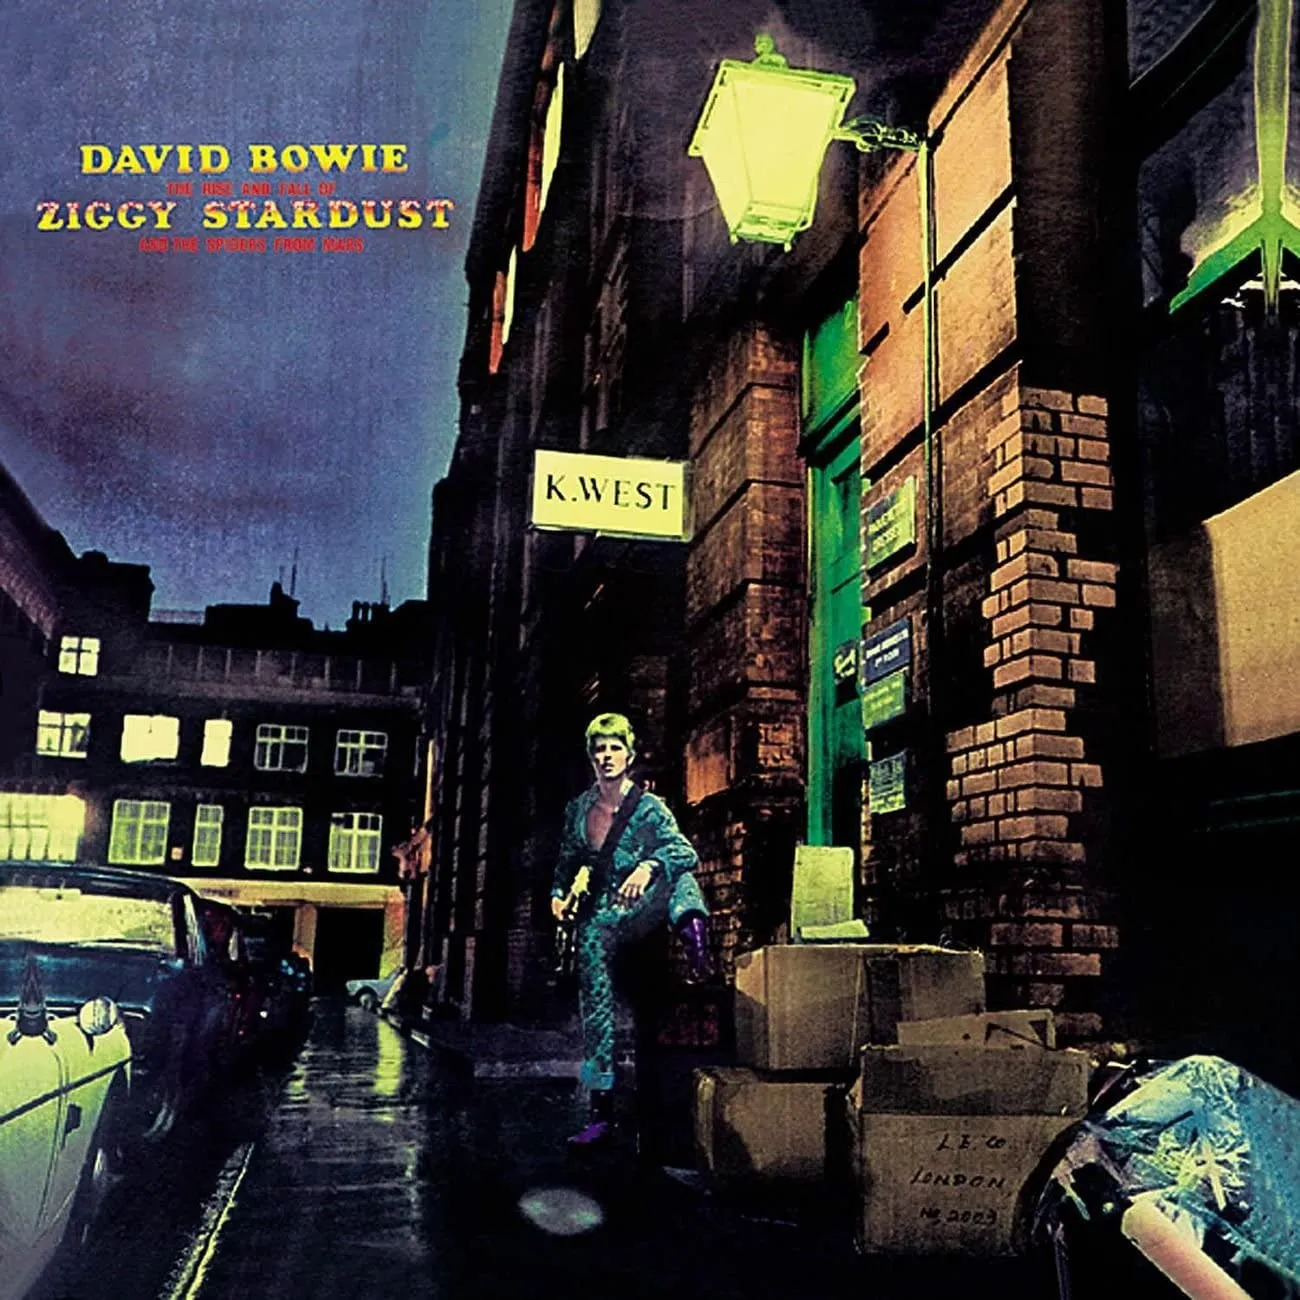 Almvbum cover for David Bowie's The Rise and Fall of Ziggy Stardust and the Spiders from Mars